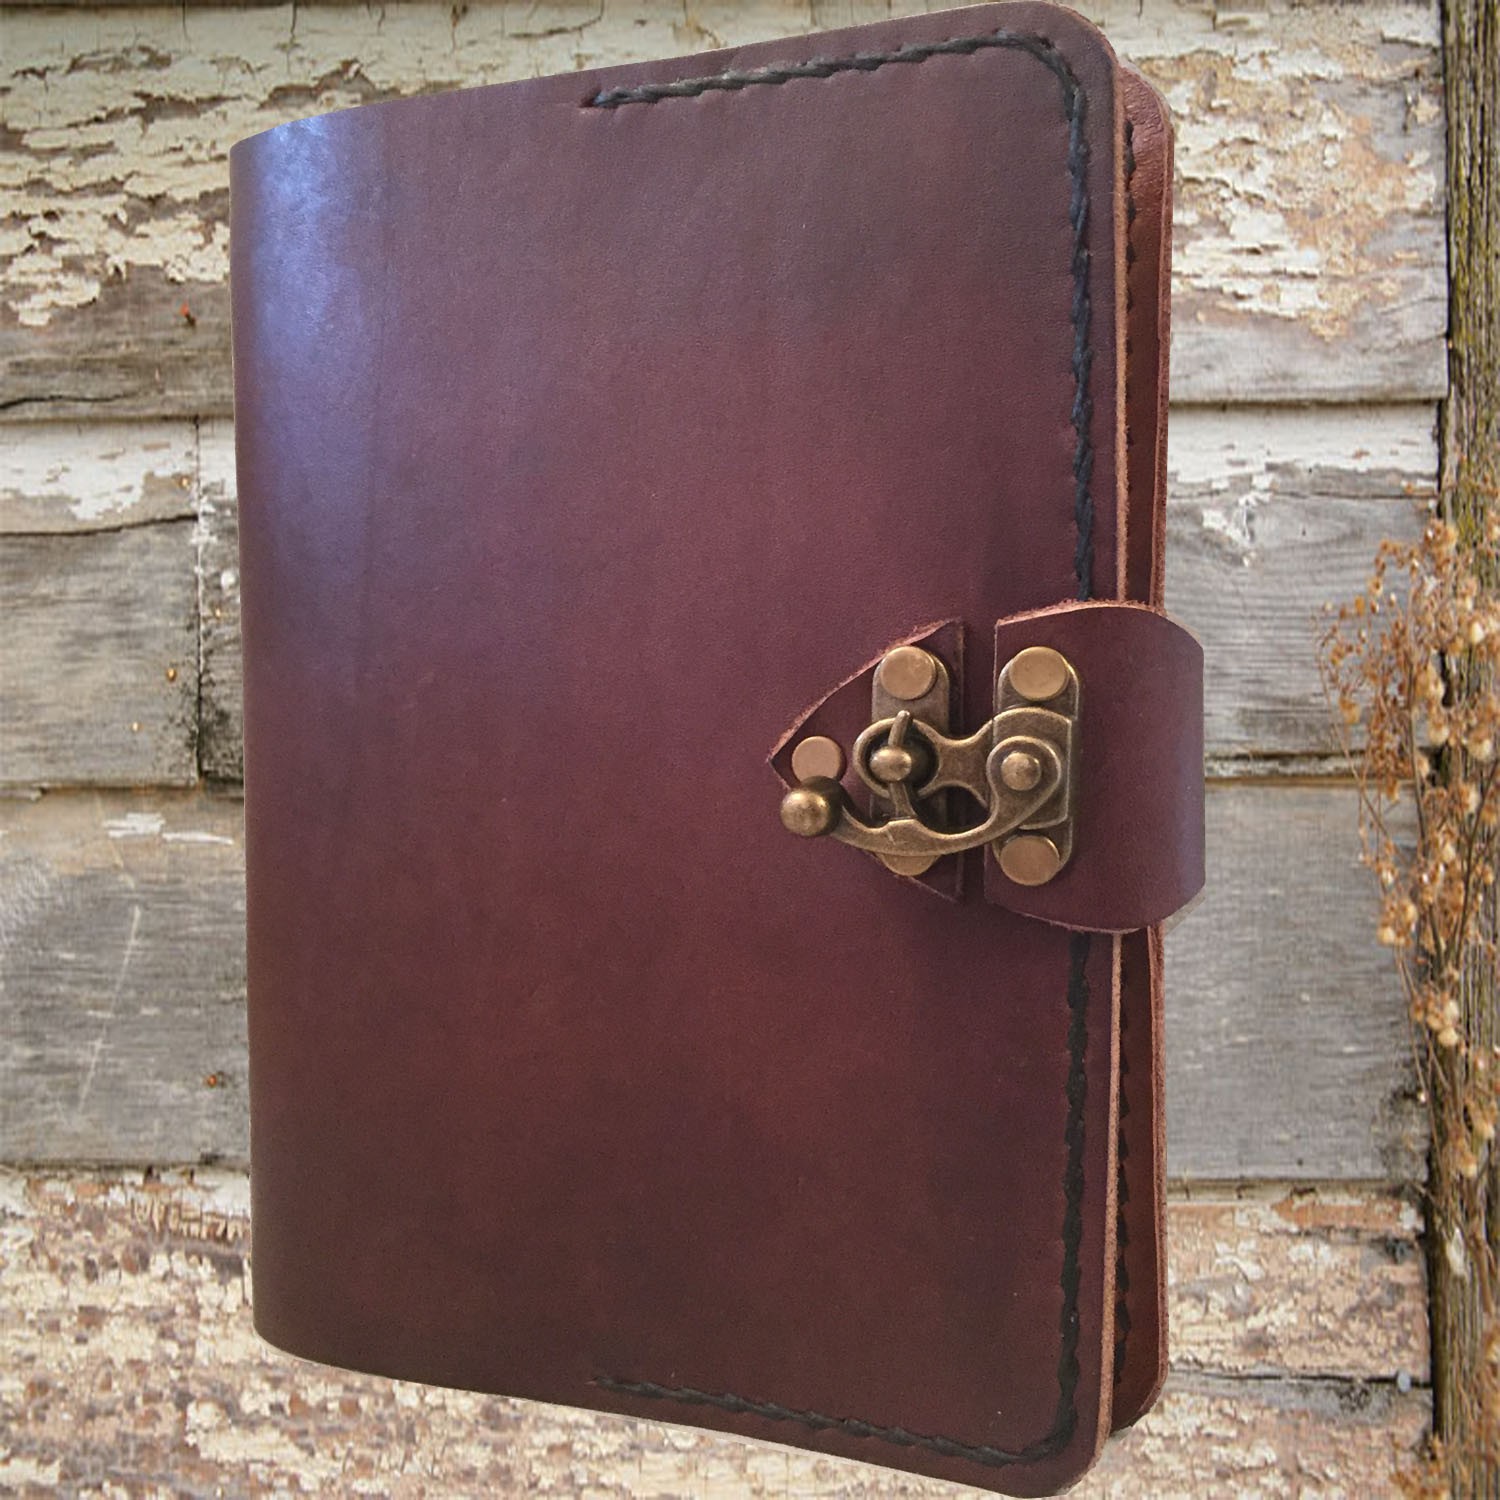 Refillable leather journal